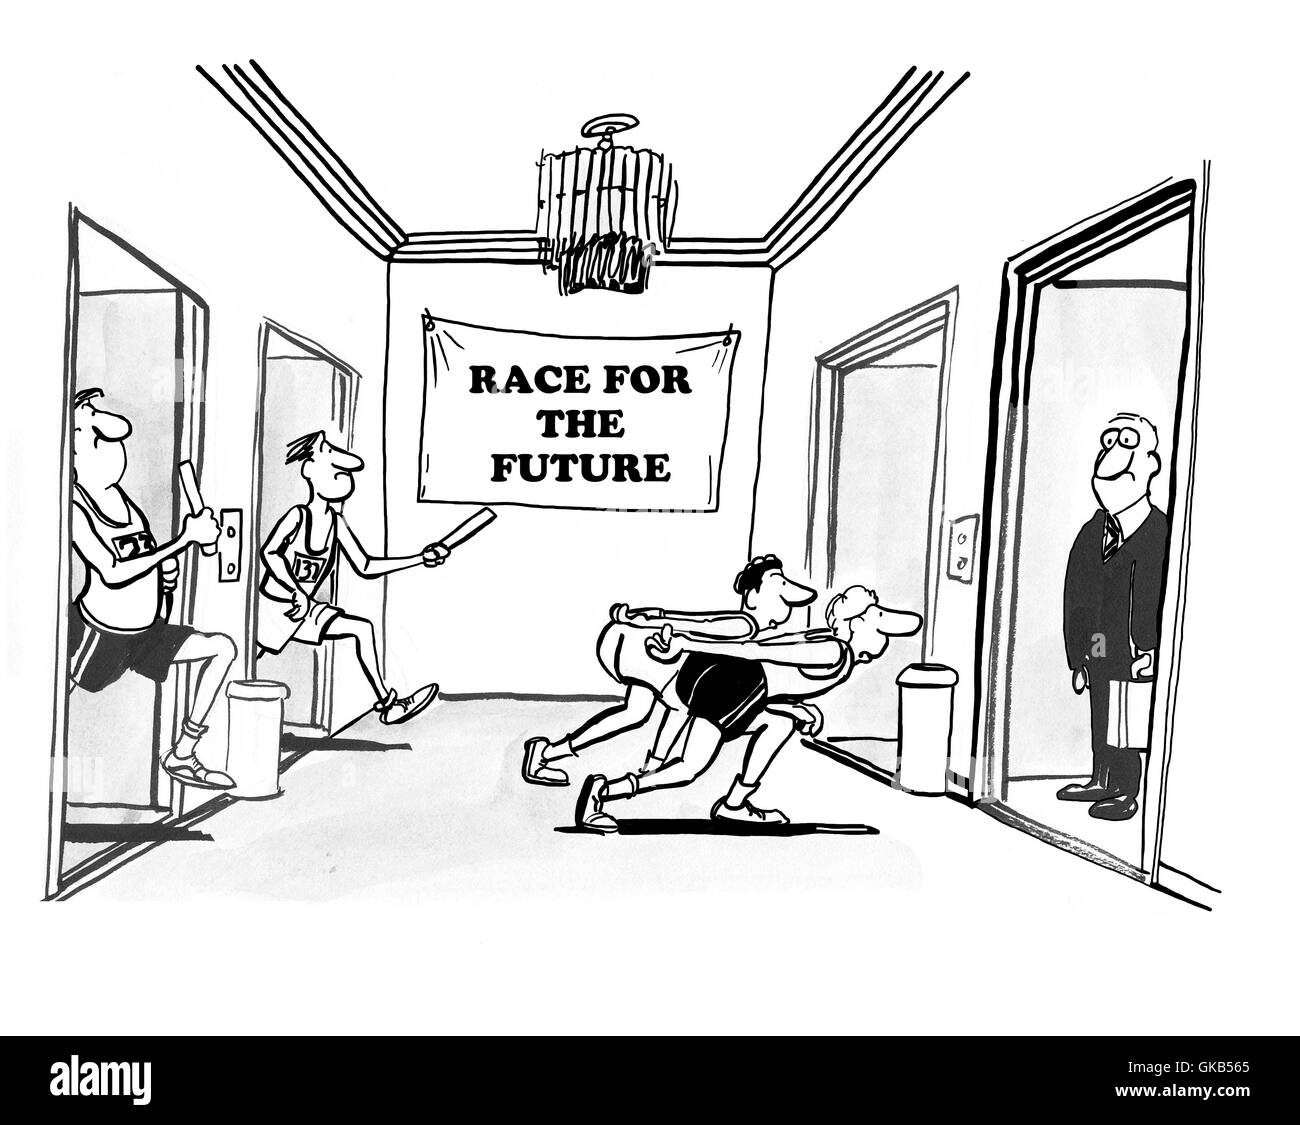 Business cartoon about race for the future. Stock Photo